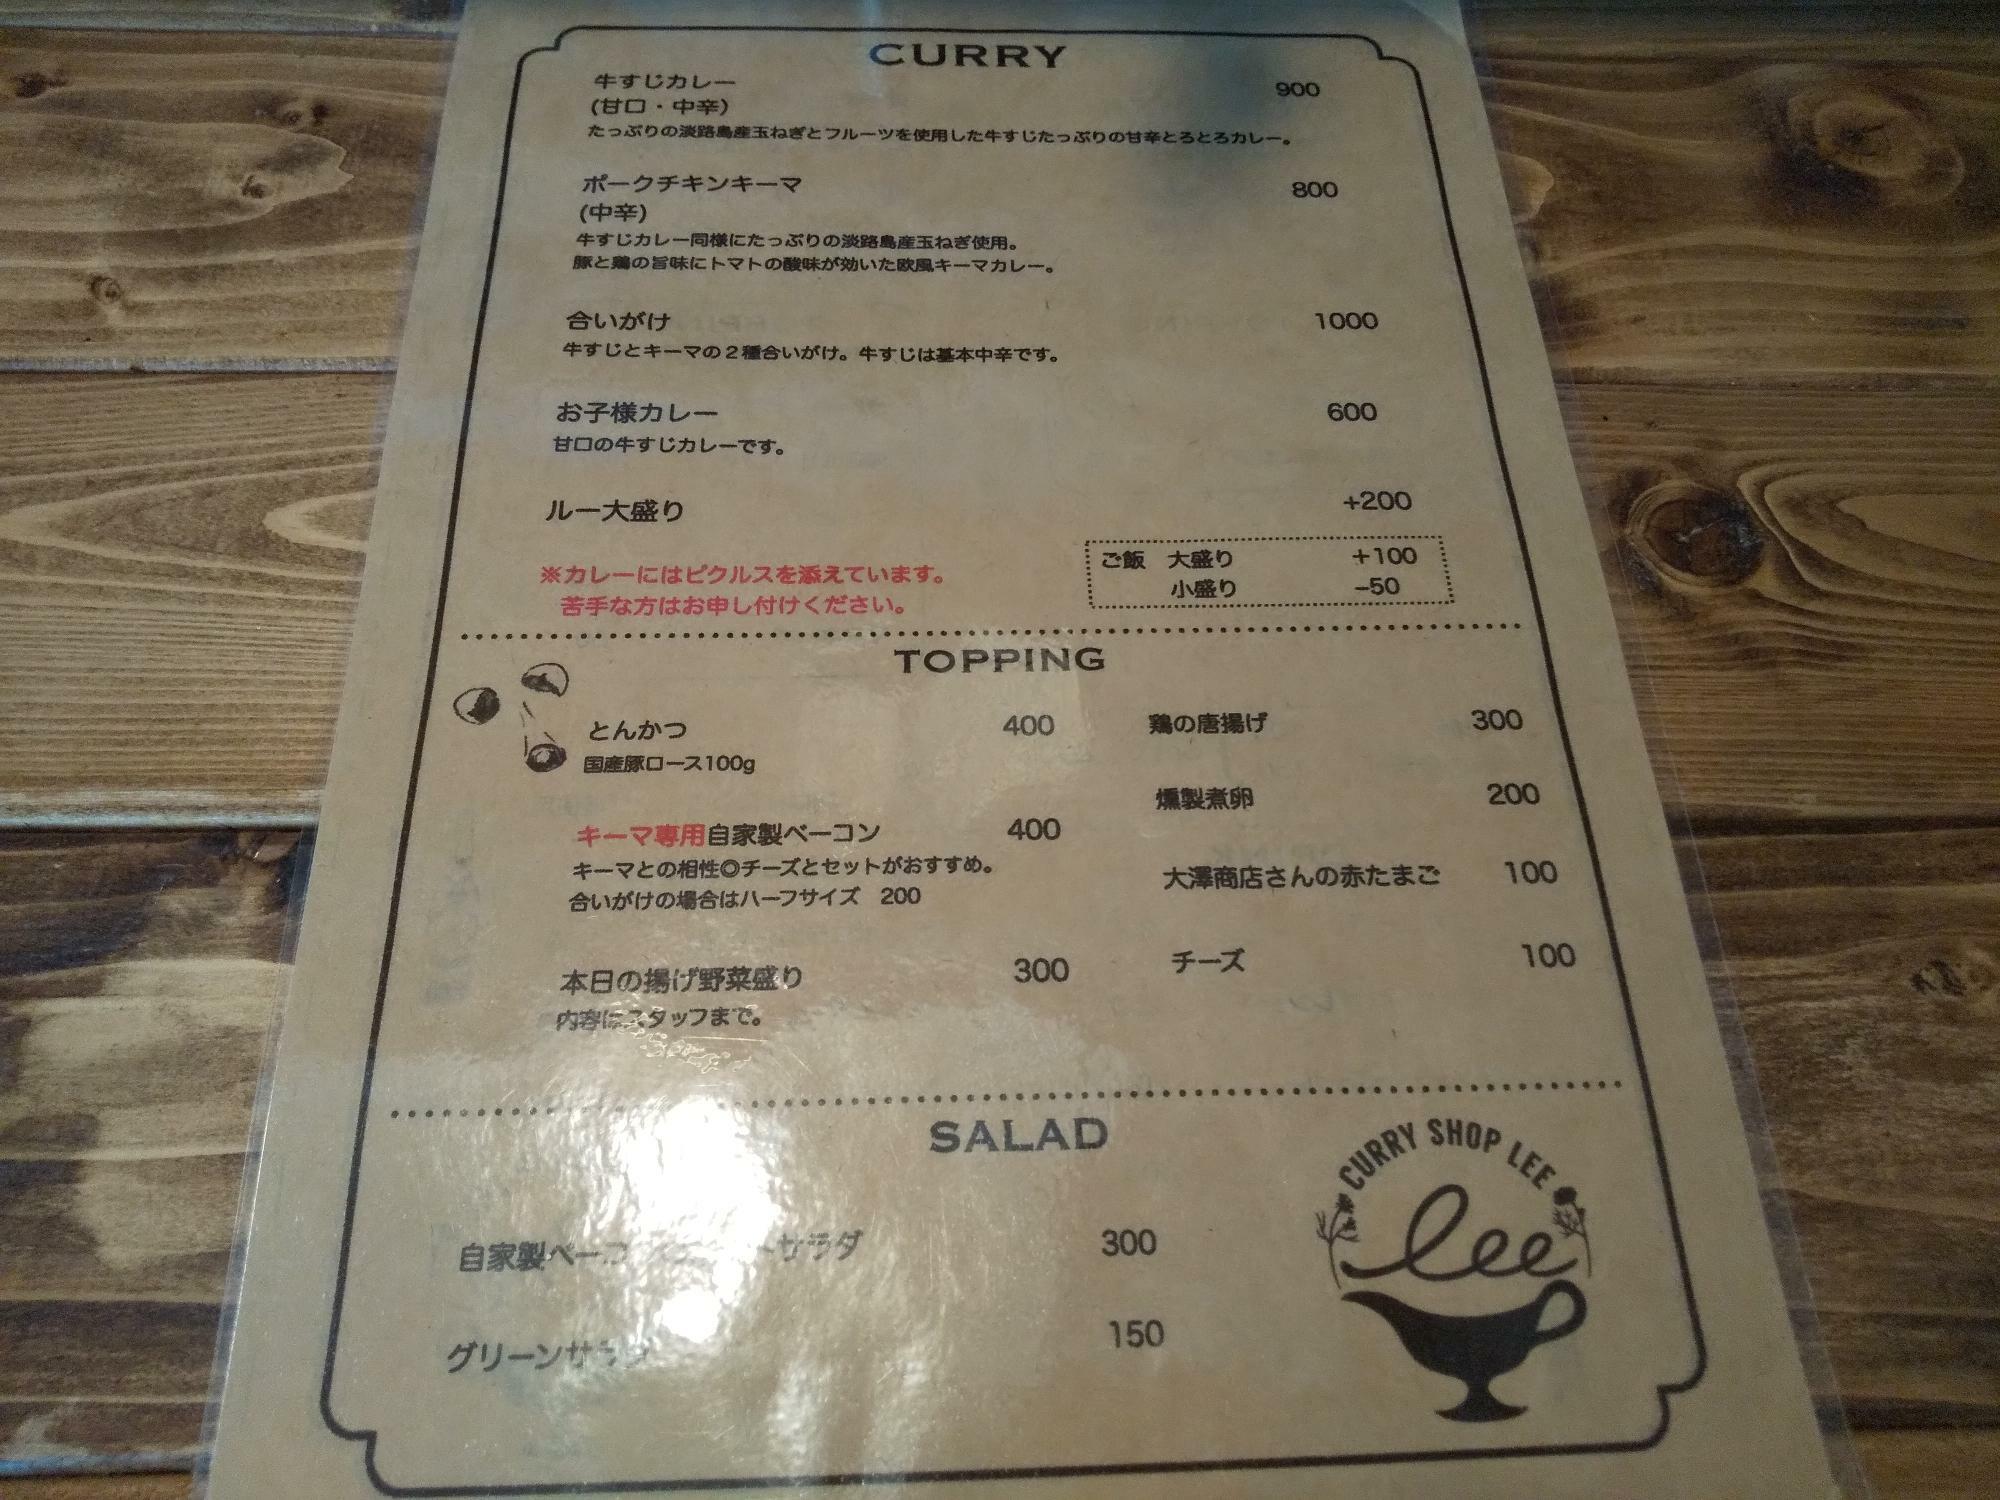 Curry Shop lee カレーメニュー